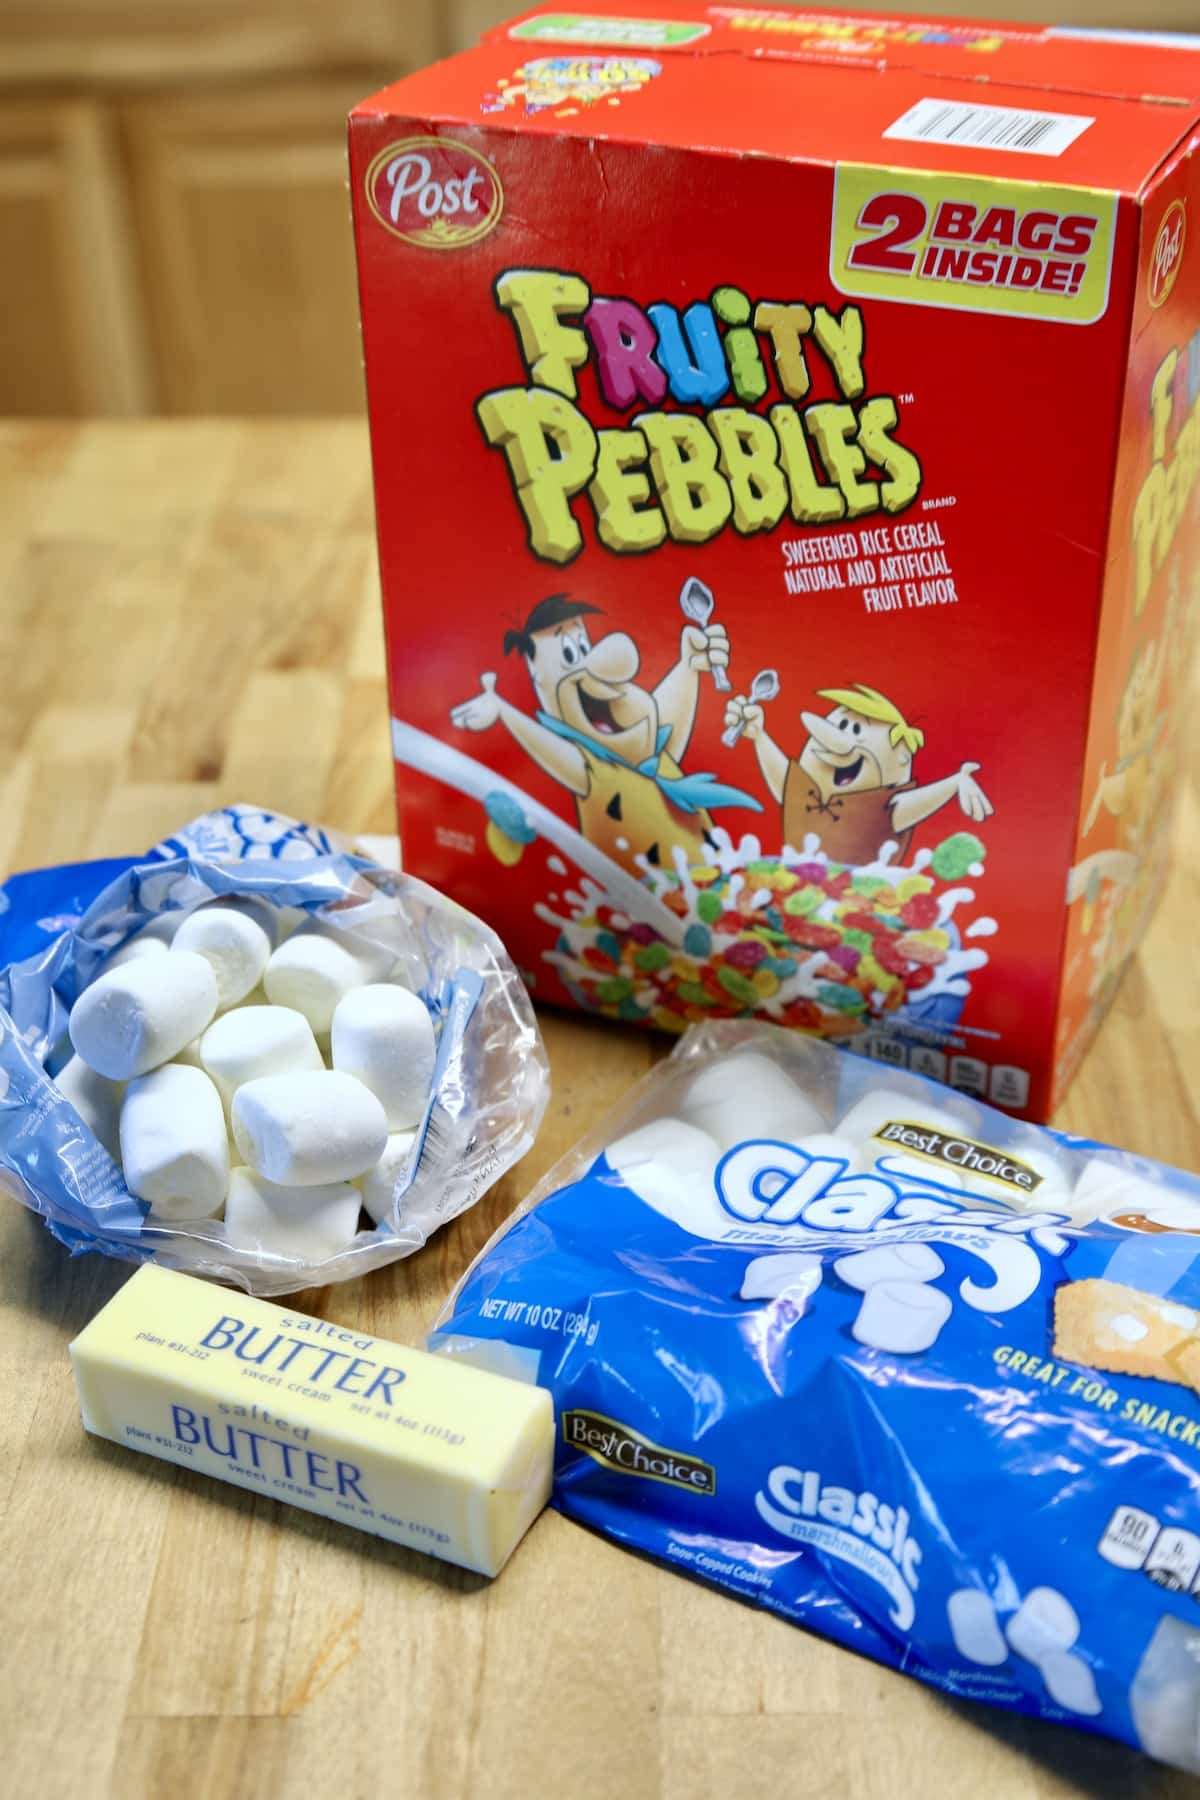 Ingredients for Fruity Pebbles treats.